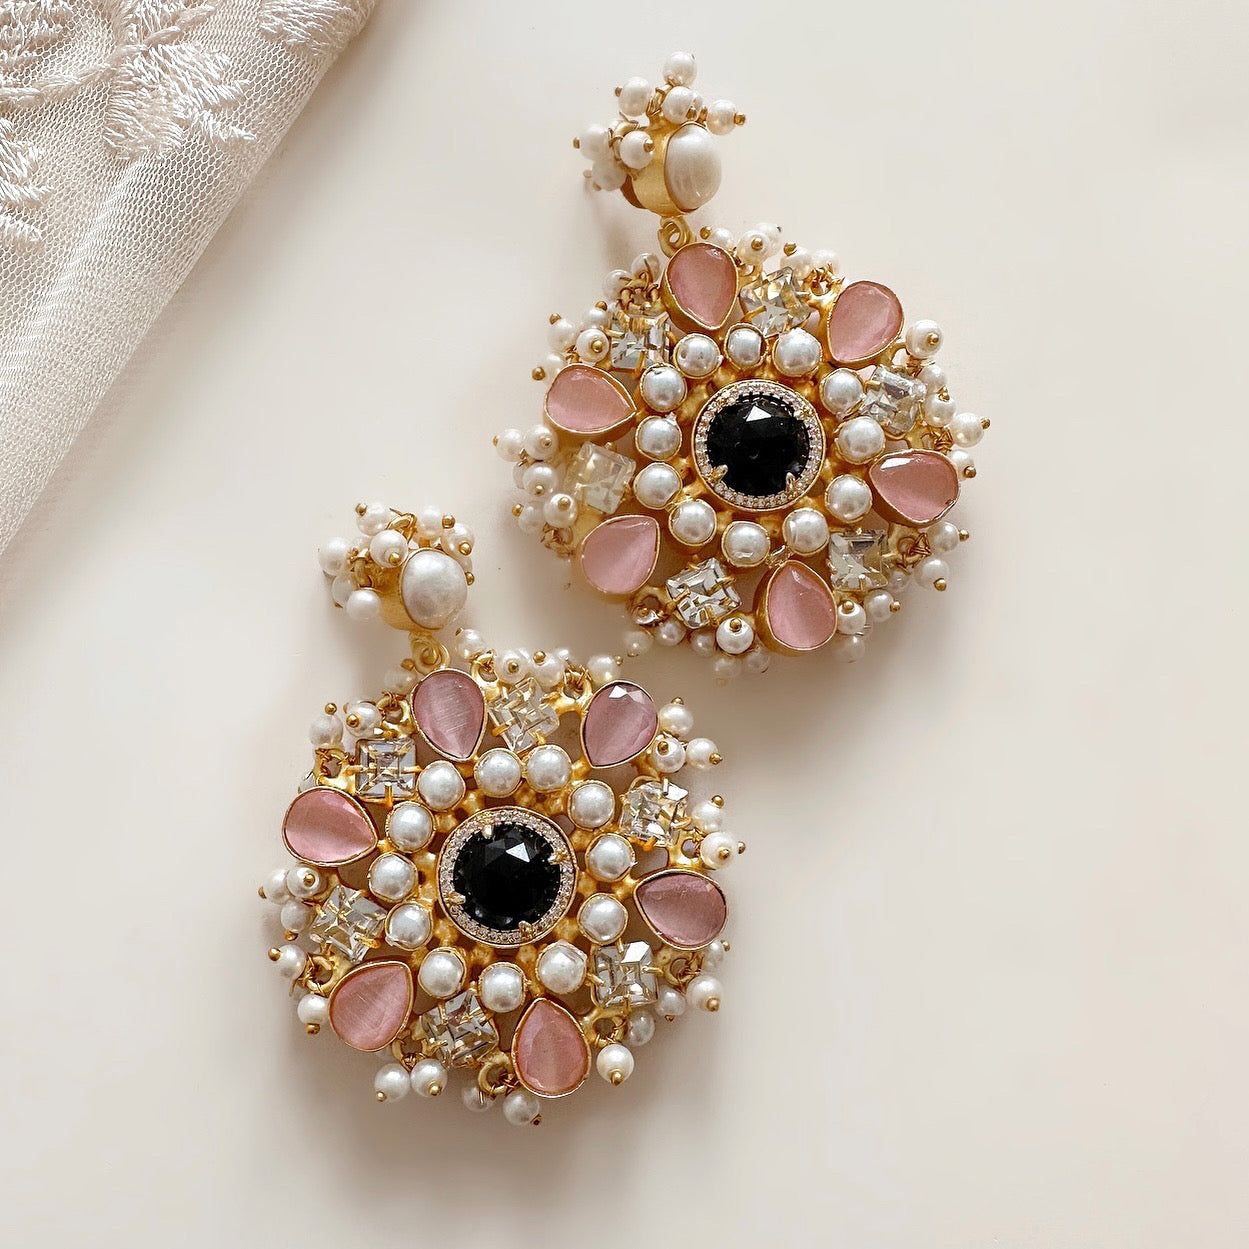 Glamourous and statement-making, the Lou Earrings add a touch of sophistication to any outfit. Featuring hues of soft pink and black, these earrings are embellished with cz crystals for extra sparkle. Elevate your look with these stunning earrings.